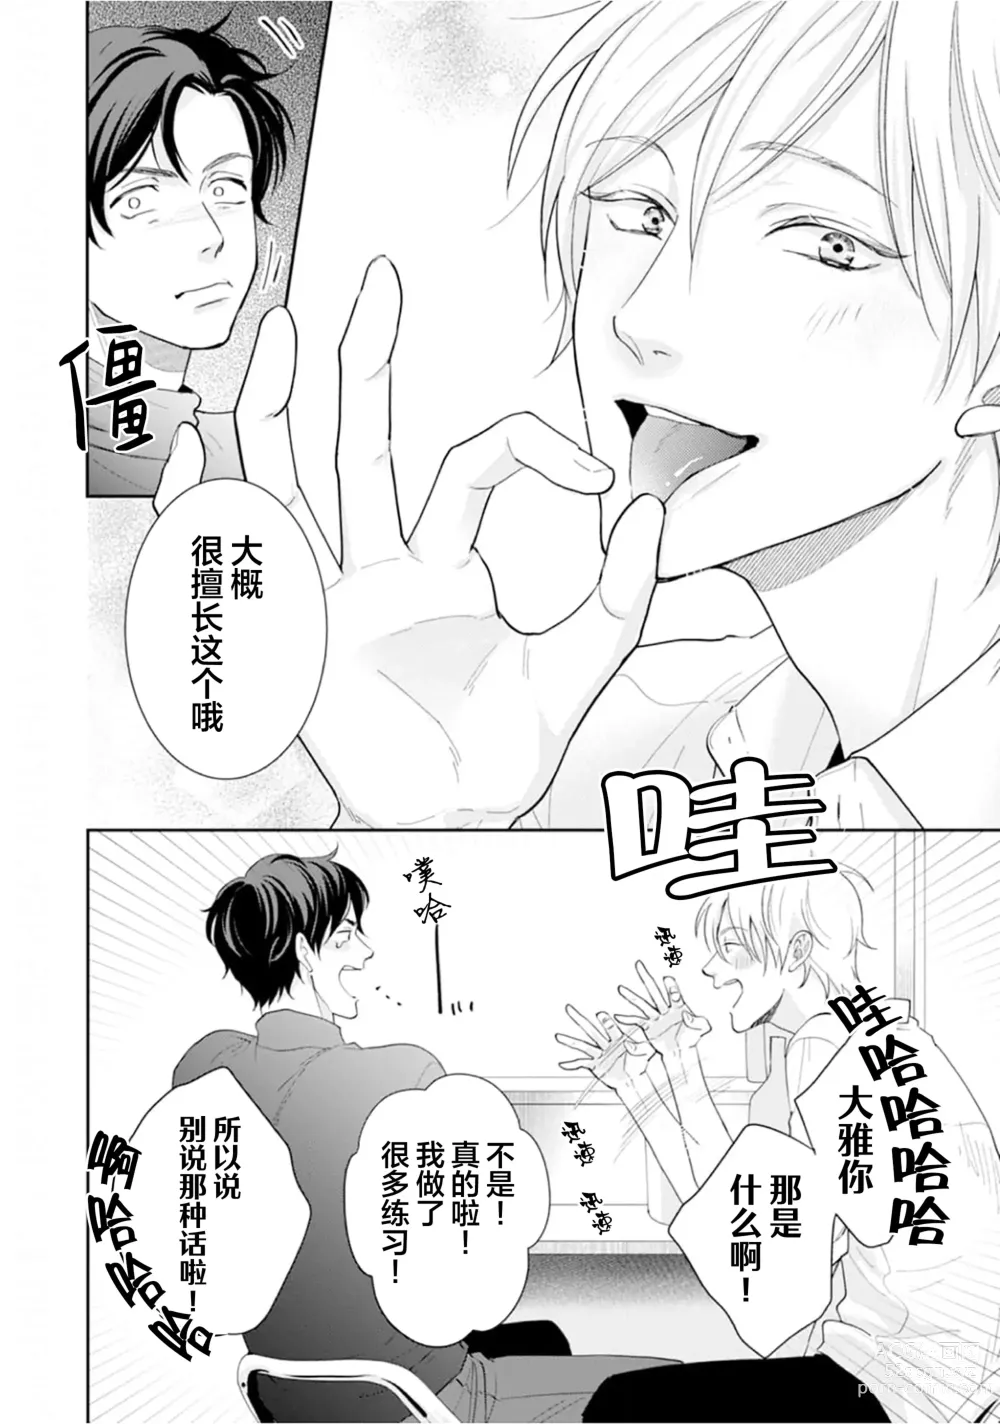 Page 26 of manga Toshiue no hitoーsecond bloomー｜年上之人—second bloom—Chinese]